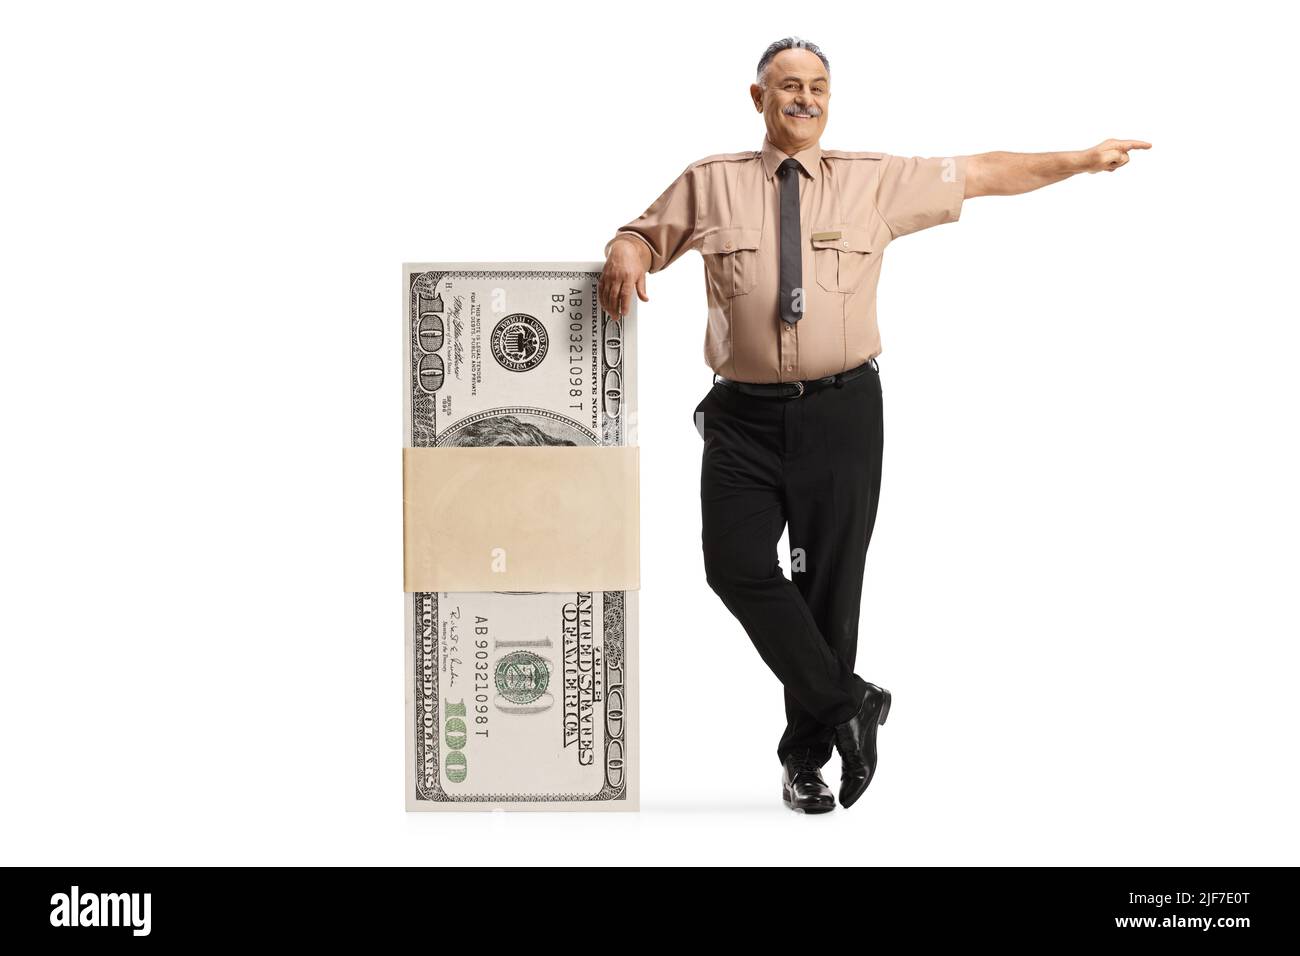 Security officer leaning on a stack of money and pointing isolated on white background Stock Photo